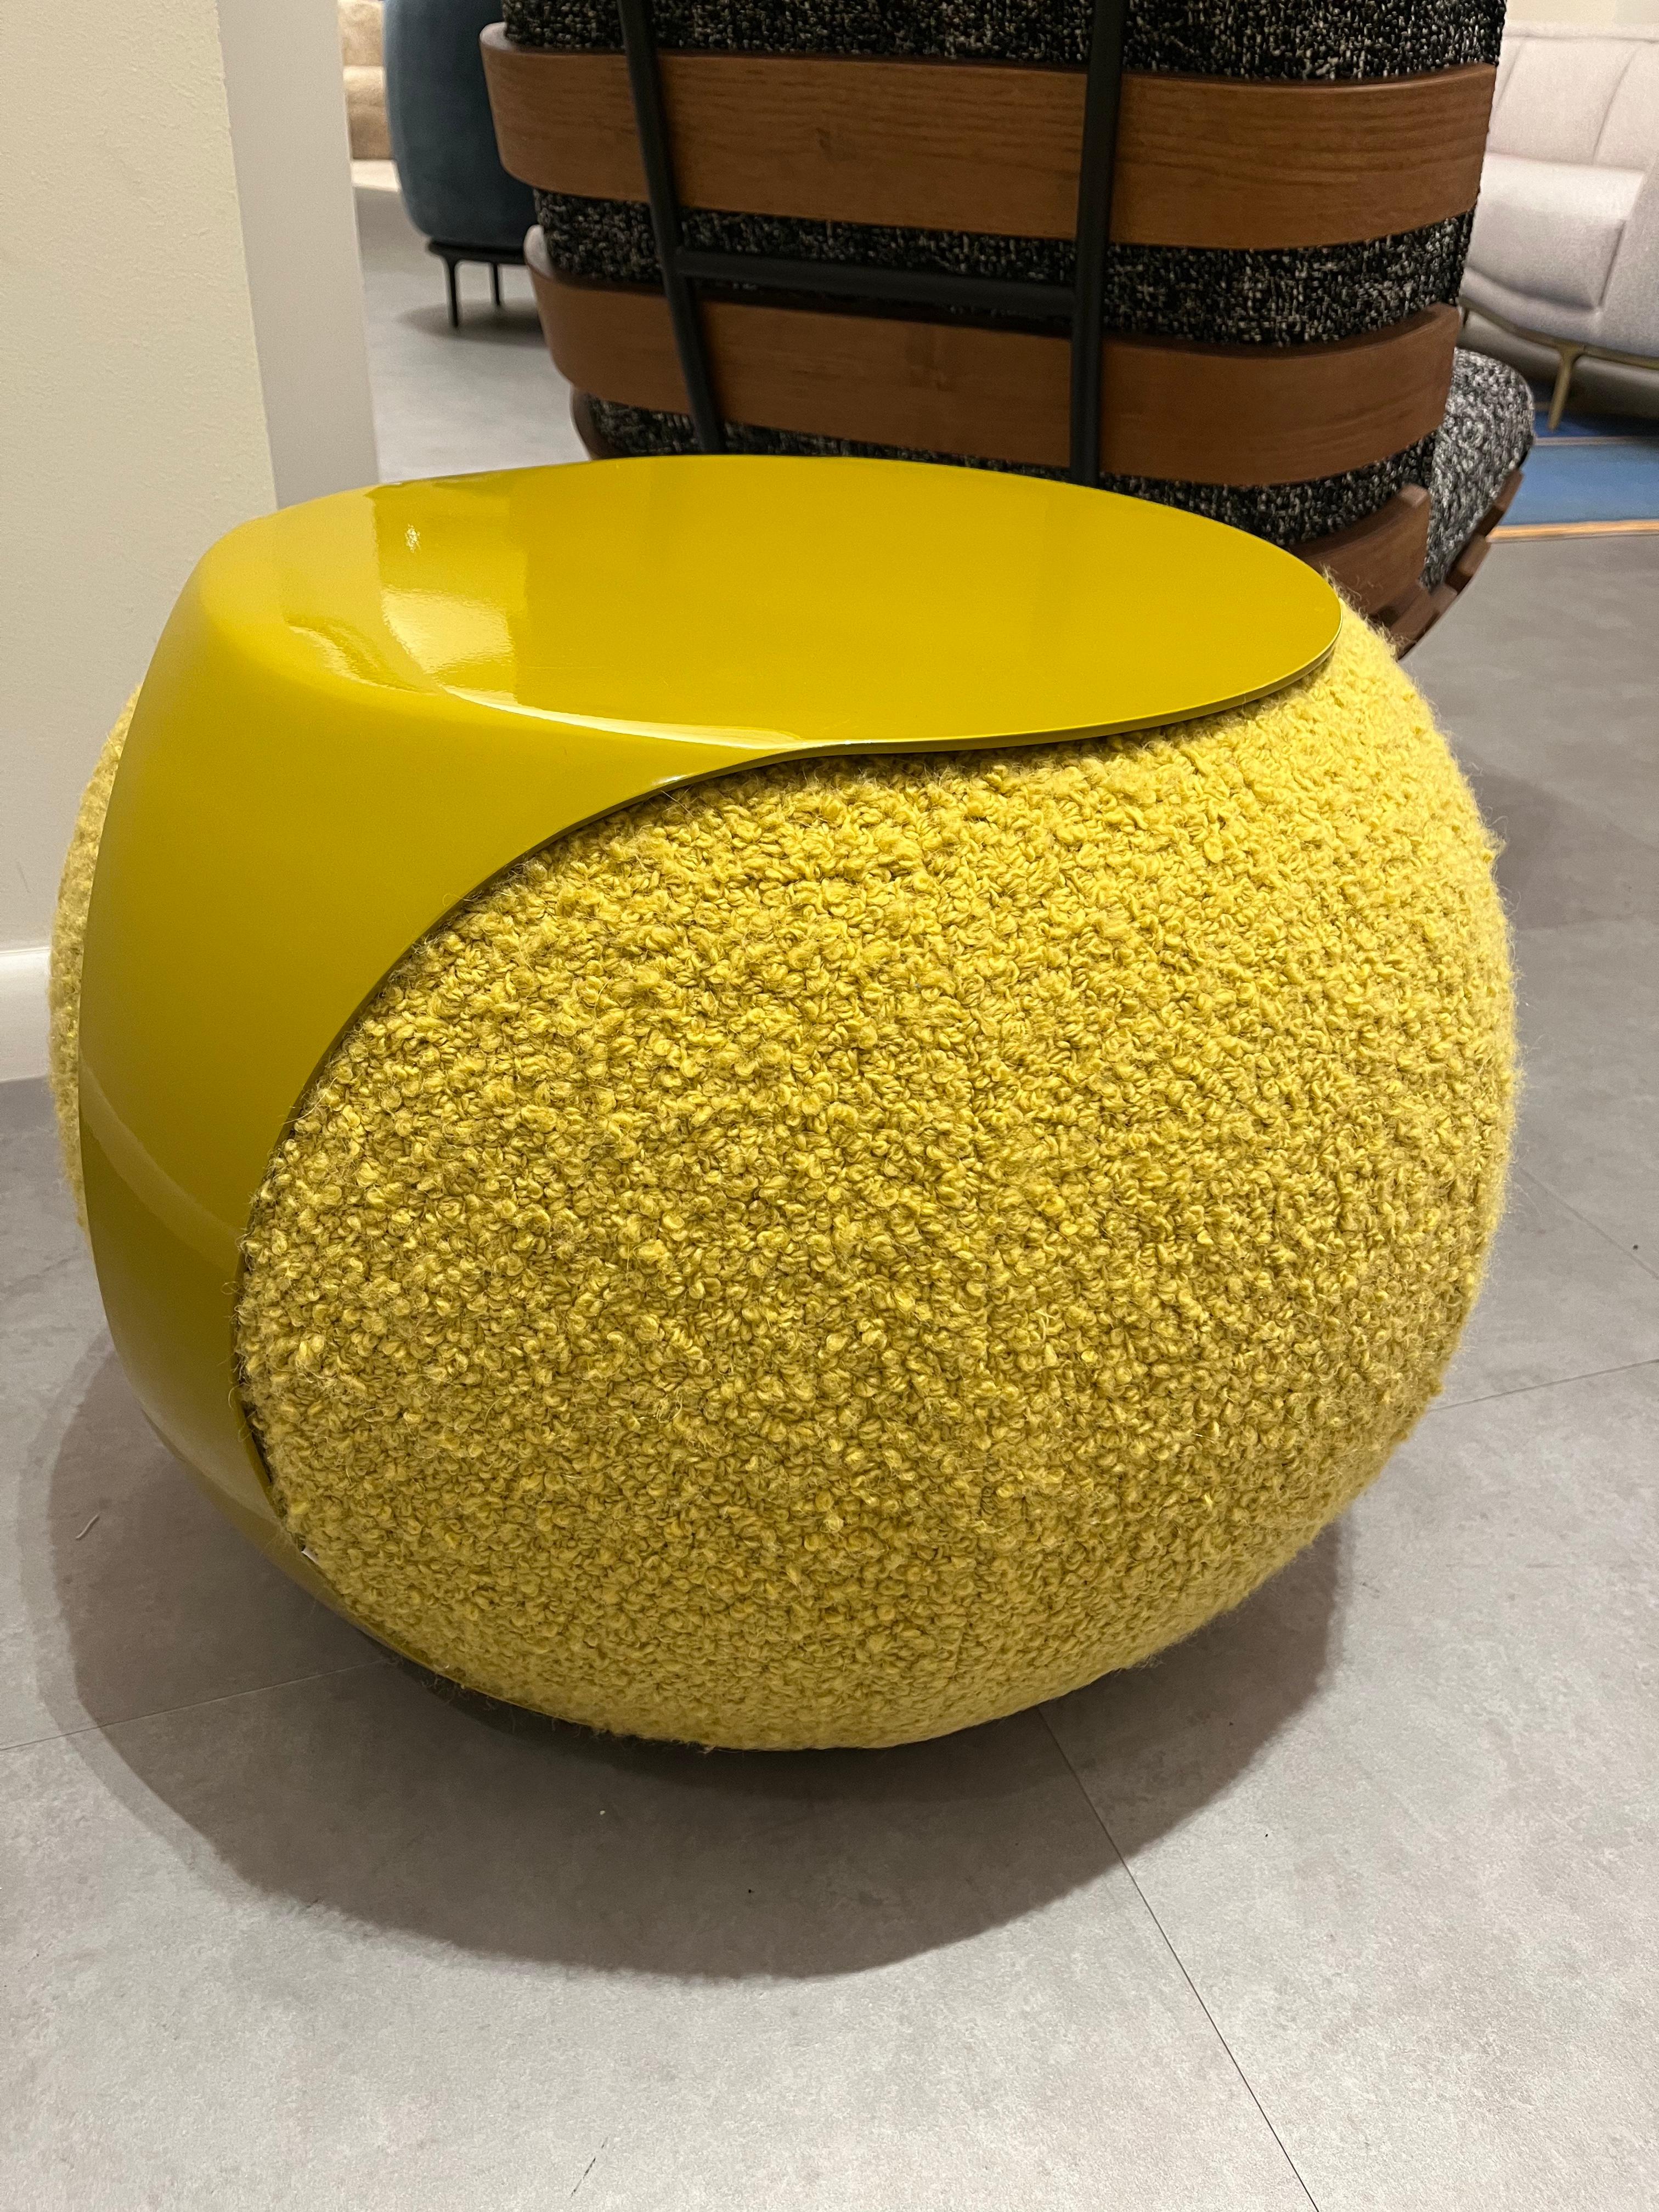 A side table WITH A TRICK UP ITS SLEEVE. WHEN ADDITIONAL SEATING OR A FOOTSTOOL IS NEEDED, THE TEXTURAL POUF SLIPS OUT FROM ITS SLEEK METAL BASE.
17